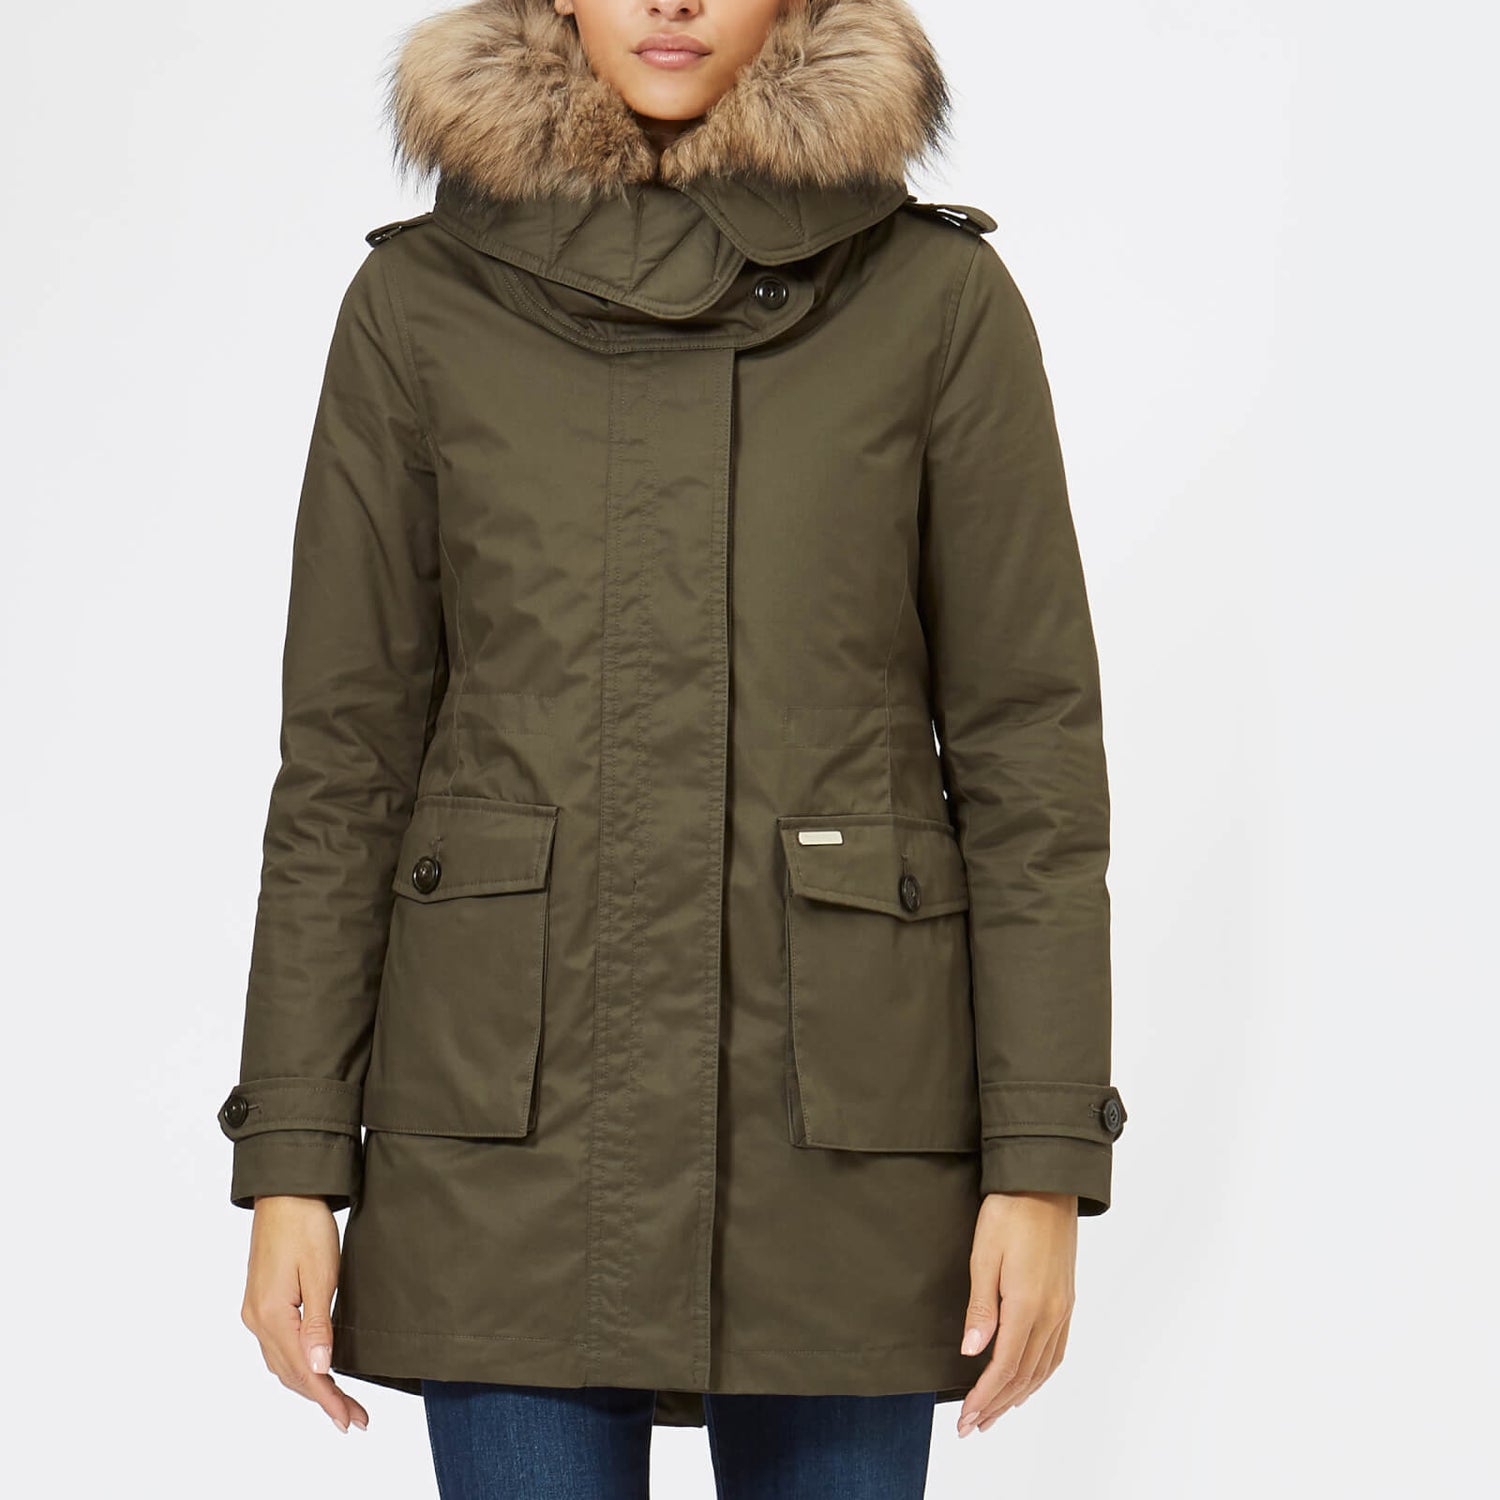 Woolrich Women's Scarlett Parka - Military Olive - Free UK Delivery ...